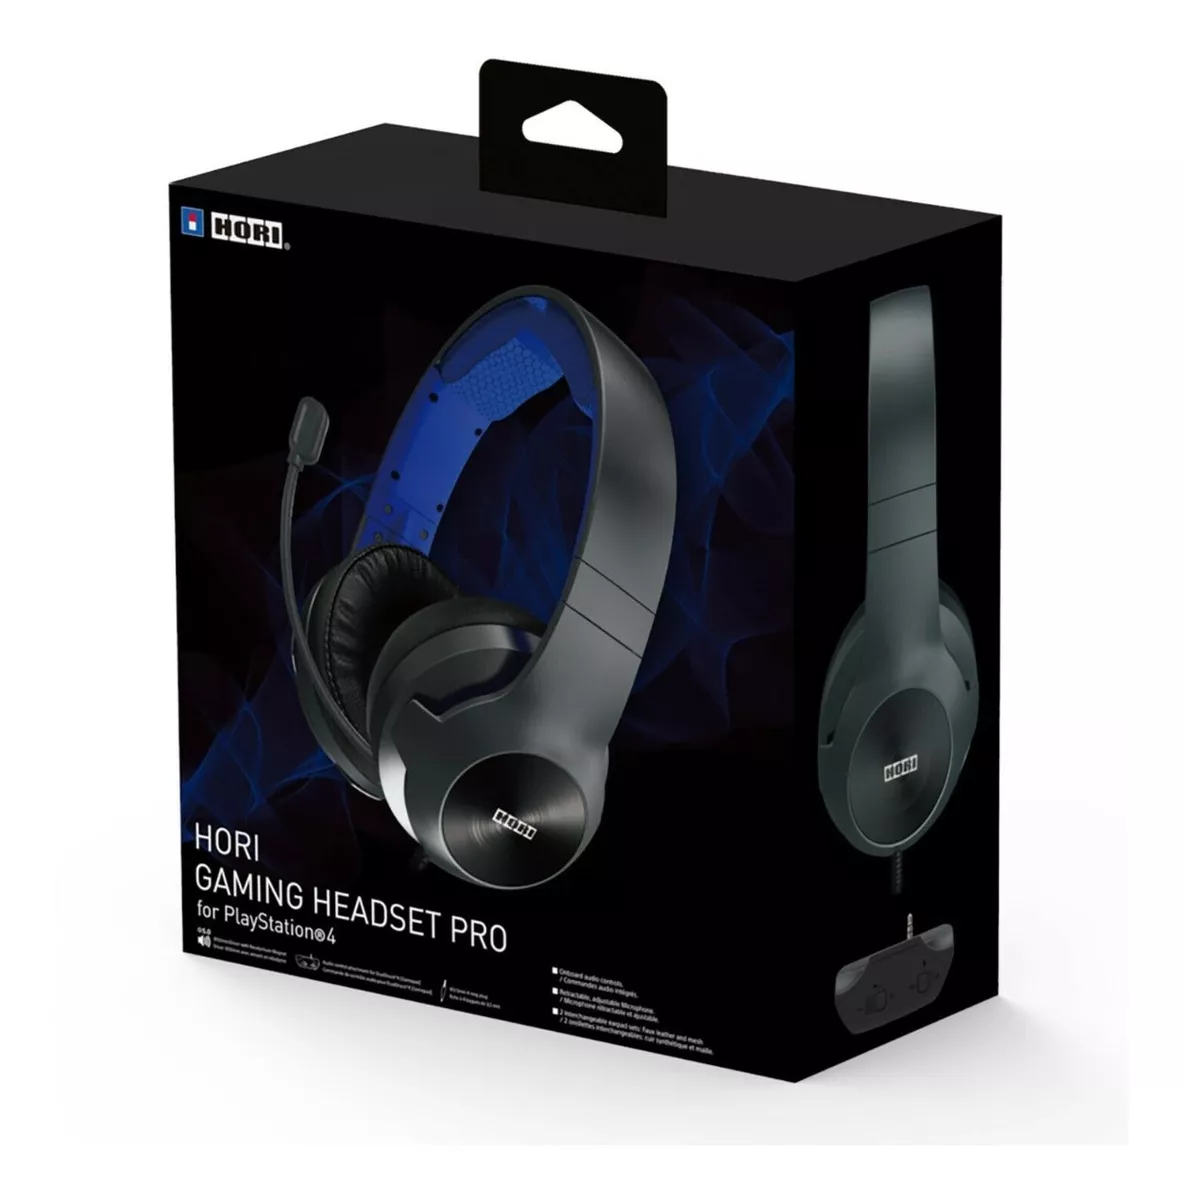 Hori Gaming Headset Pro For Playstation 4